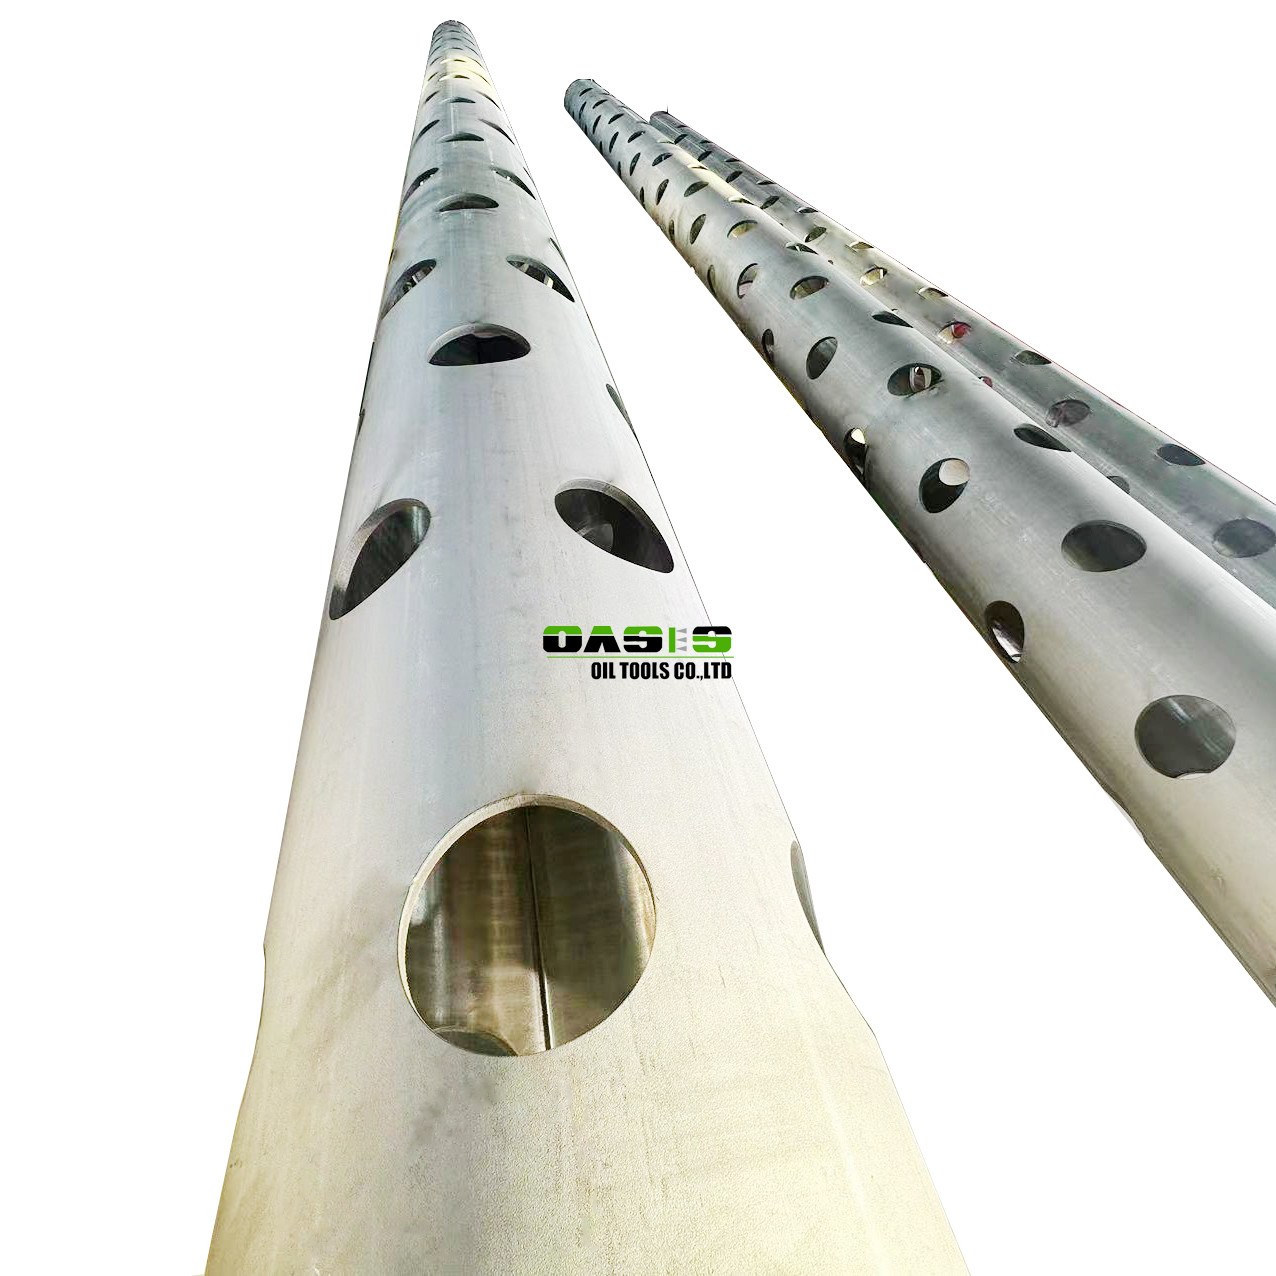 and Flexible The Role of Perforated Stainless Steel Pipe in Flood Management